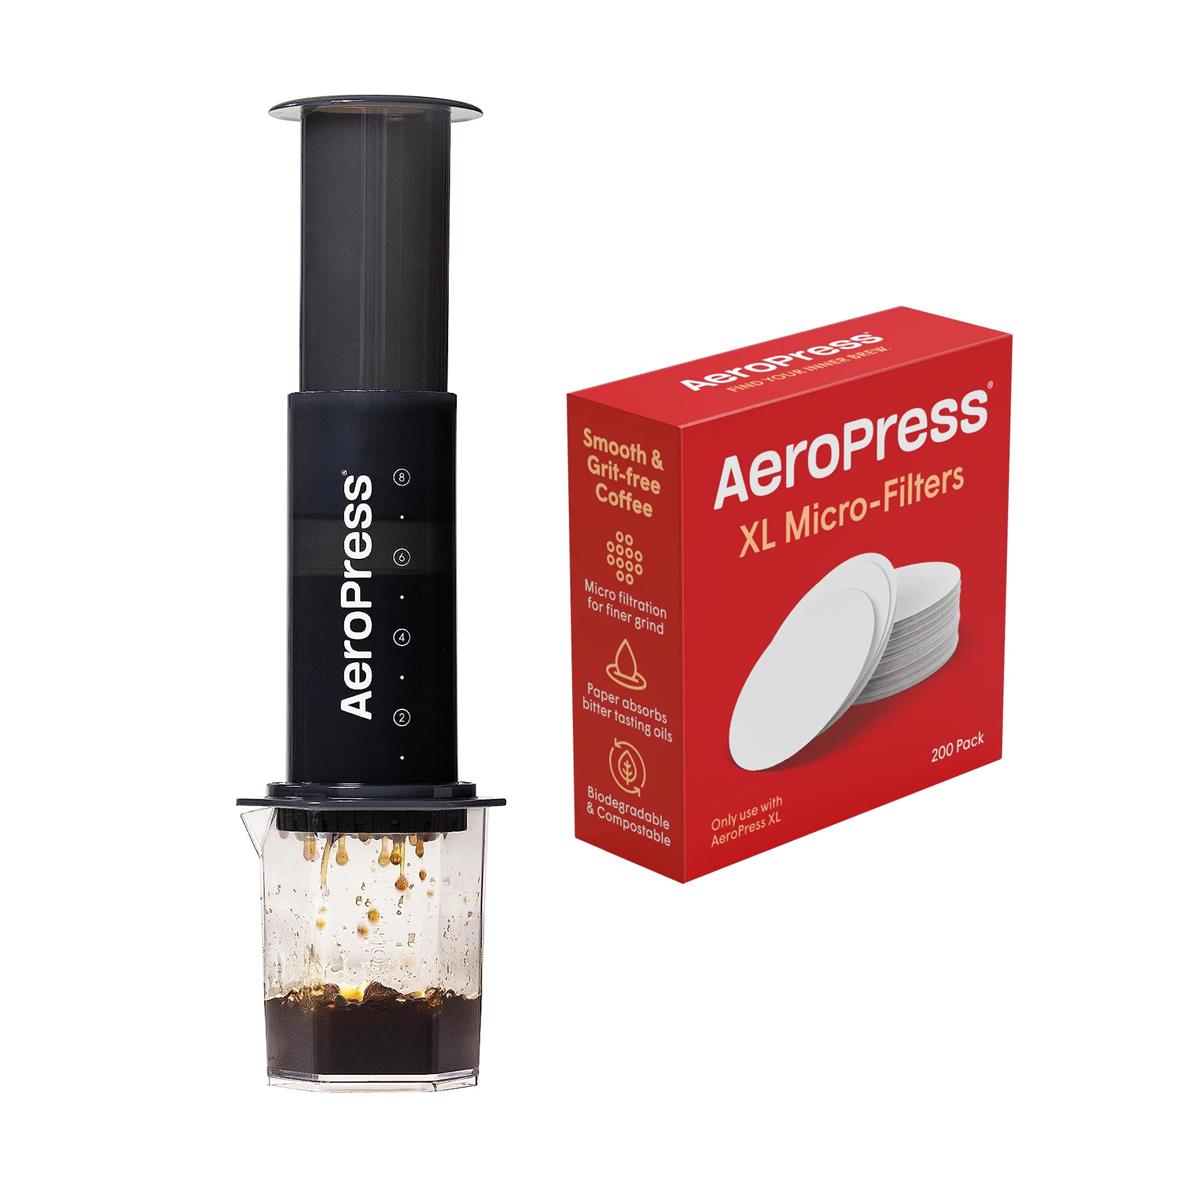 AeroPress - New Special Bundle with XL Coffee Maker + 200 Microfilters for XL Coffee Maker